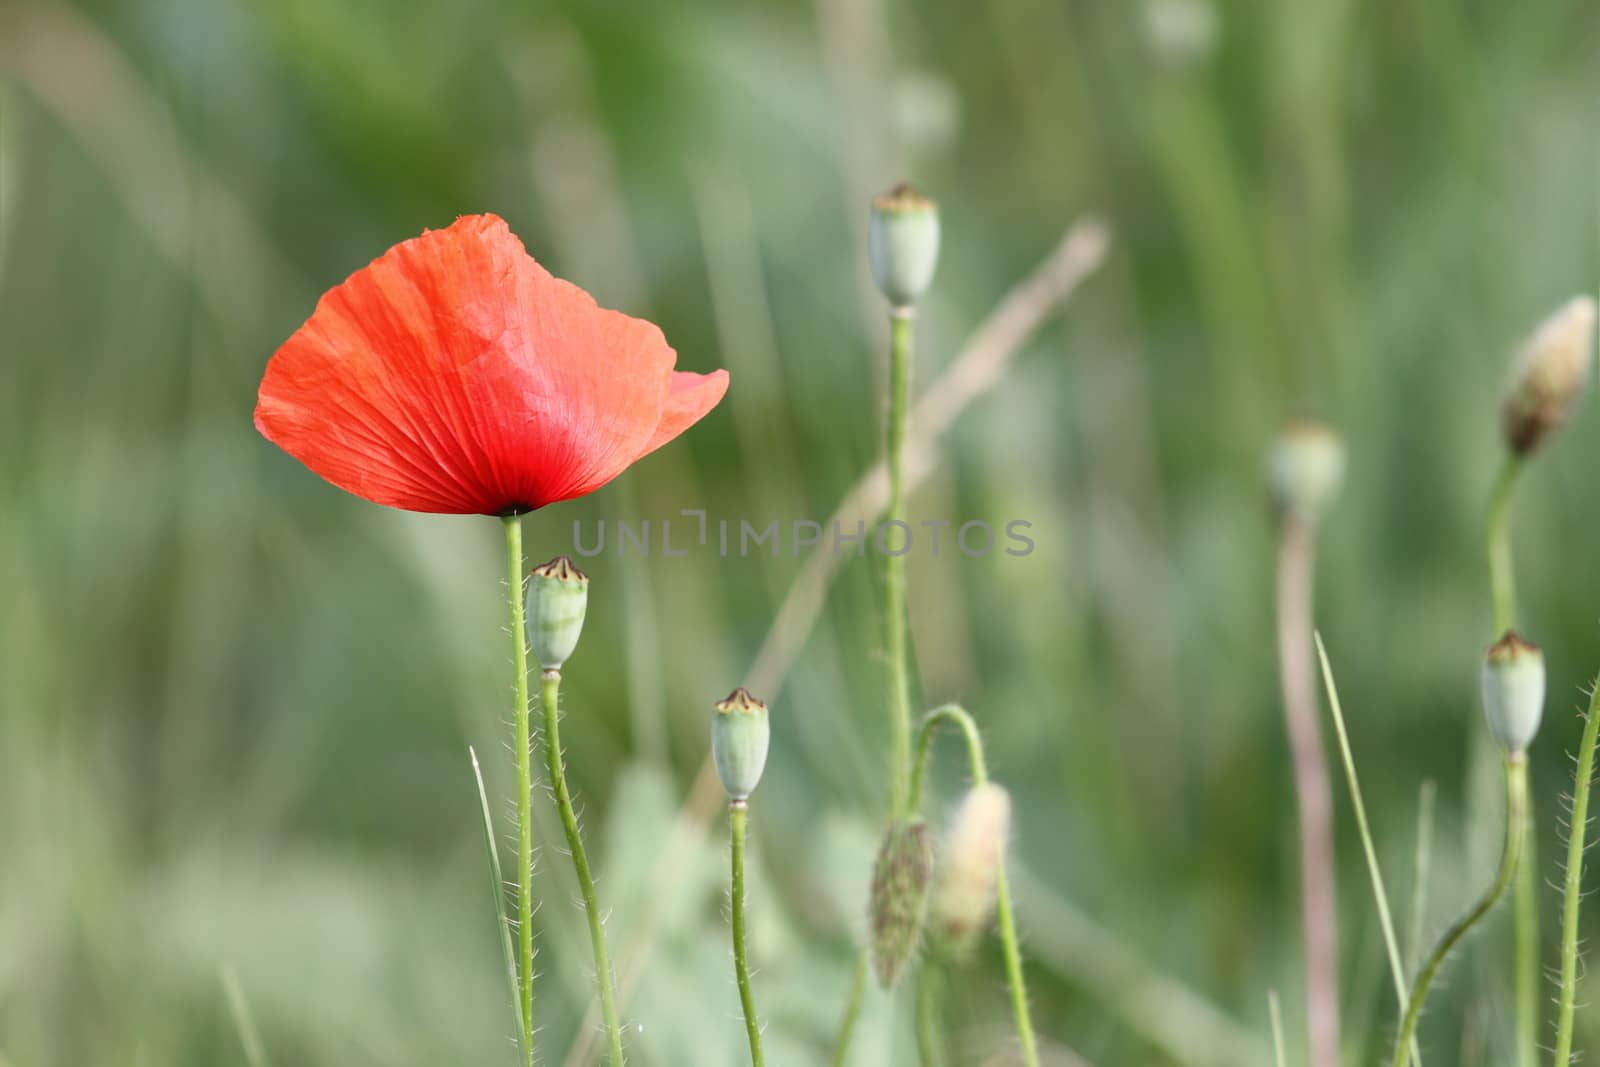 red summer flower growing free in the wild - beautiful poppy detail